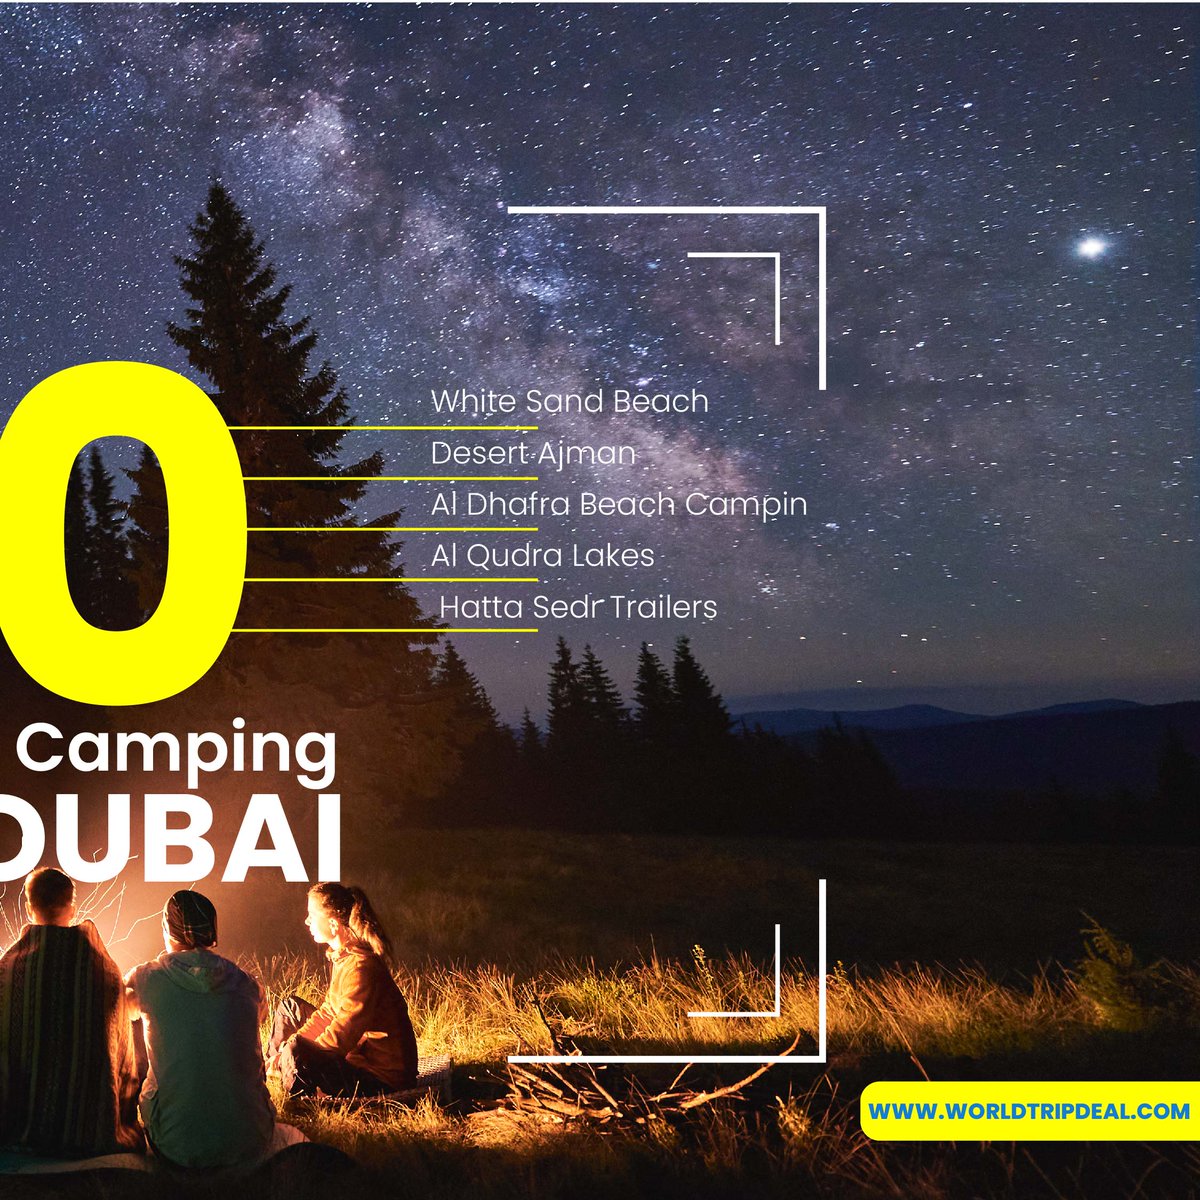 Need new places for your night camping? Check out these amazing places for your new exciting activities. Don't miss out on these: tinyurl.com/d29ttj9p
#WorldTripDeal #CampingAdventures #CampLife #naturelovers #NightUnderTheStars